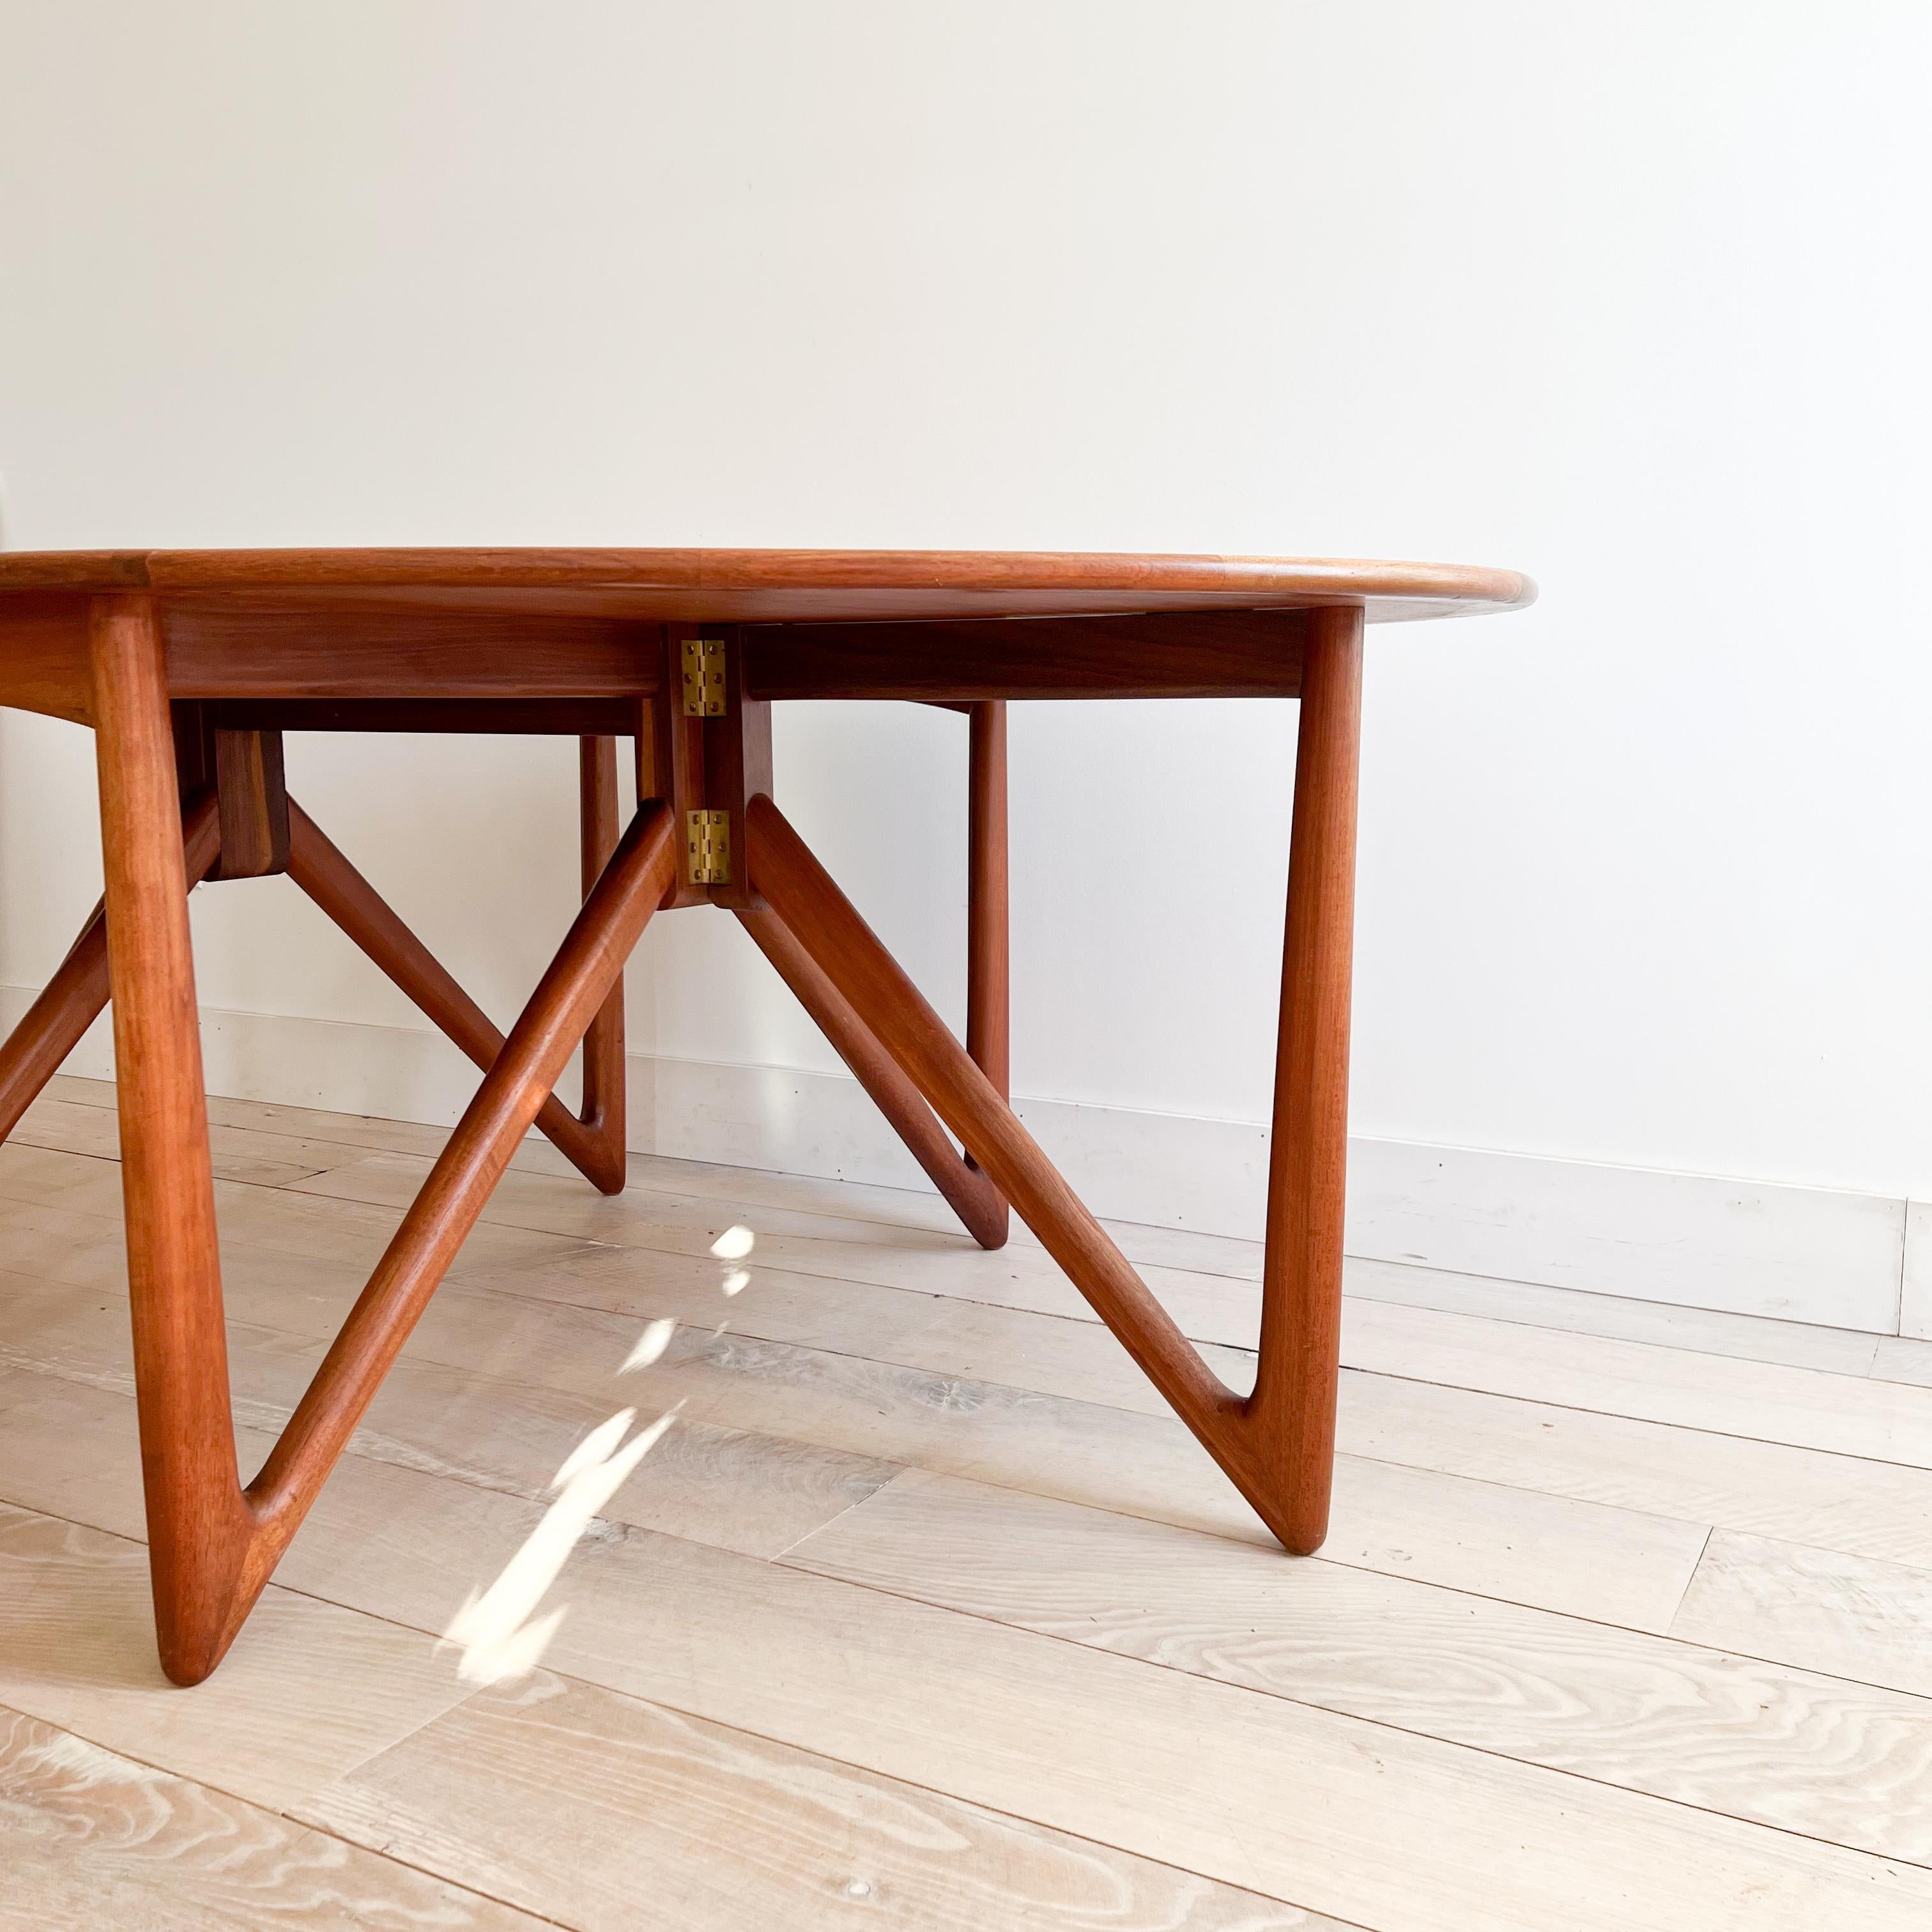 Discover a stunning piece of mid-century modern design with this Danish teak gateleg dining table crafted by Niels Koefoed. Featuring a sleek silhouette and exquisite teak wood construction, this table exudes timeless elegance. The original finish